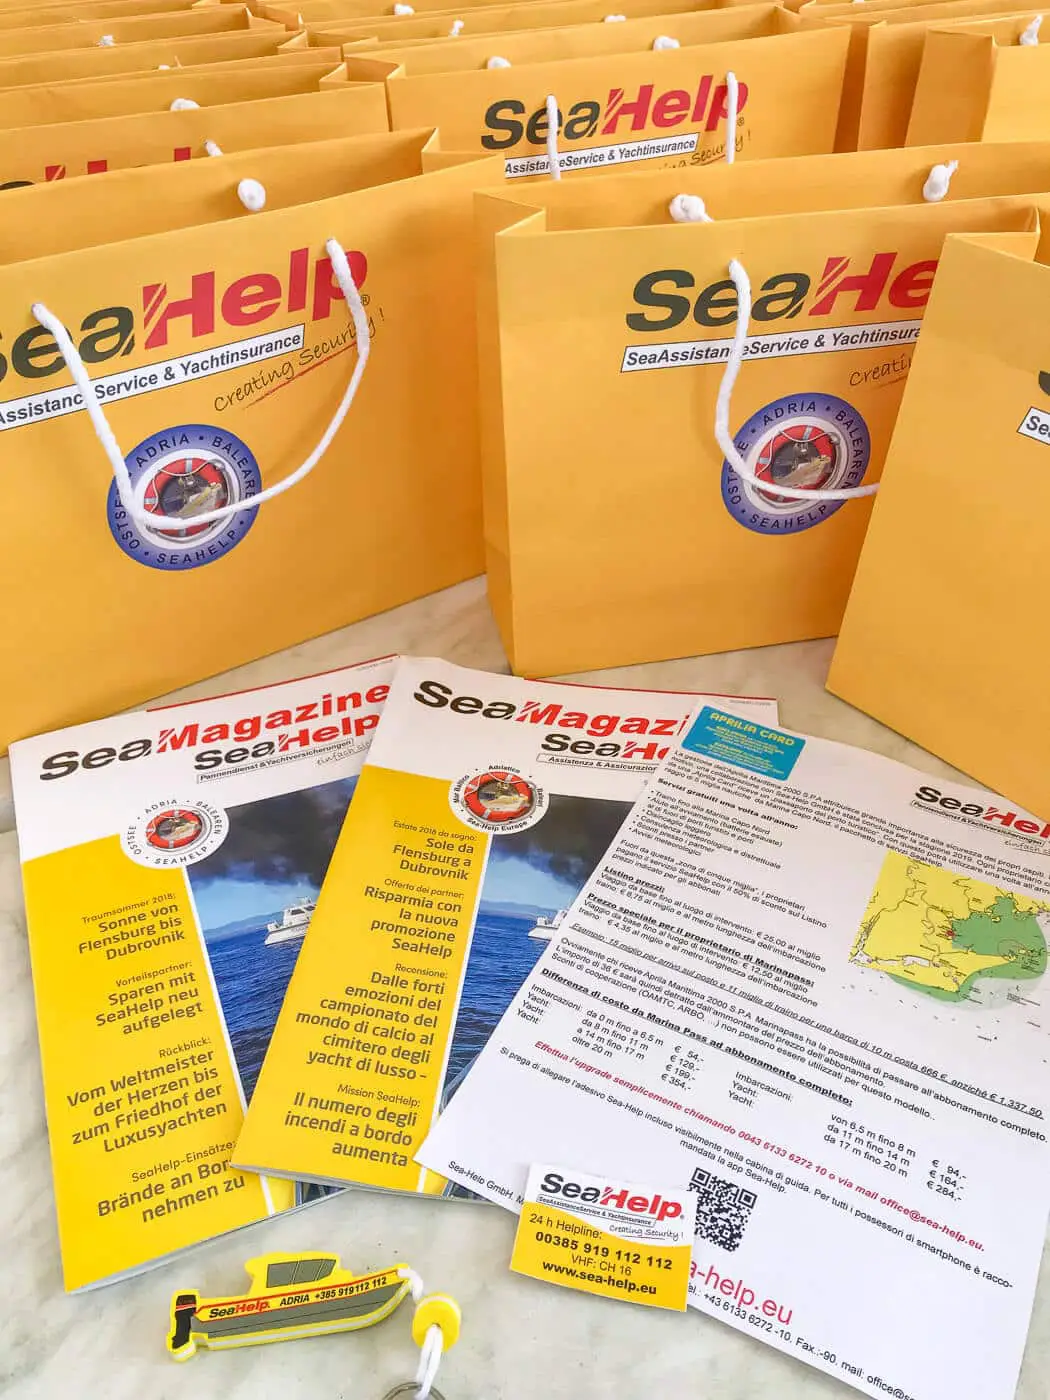 SeaHelp marina pass for all permanent residents of Marina Capo Nord